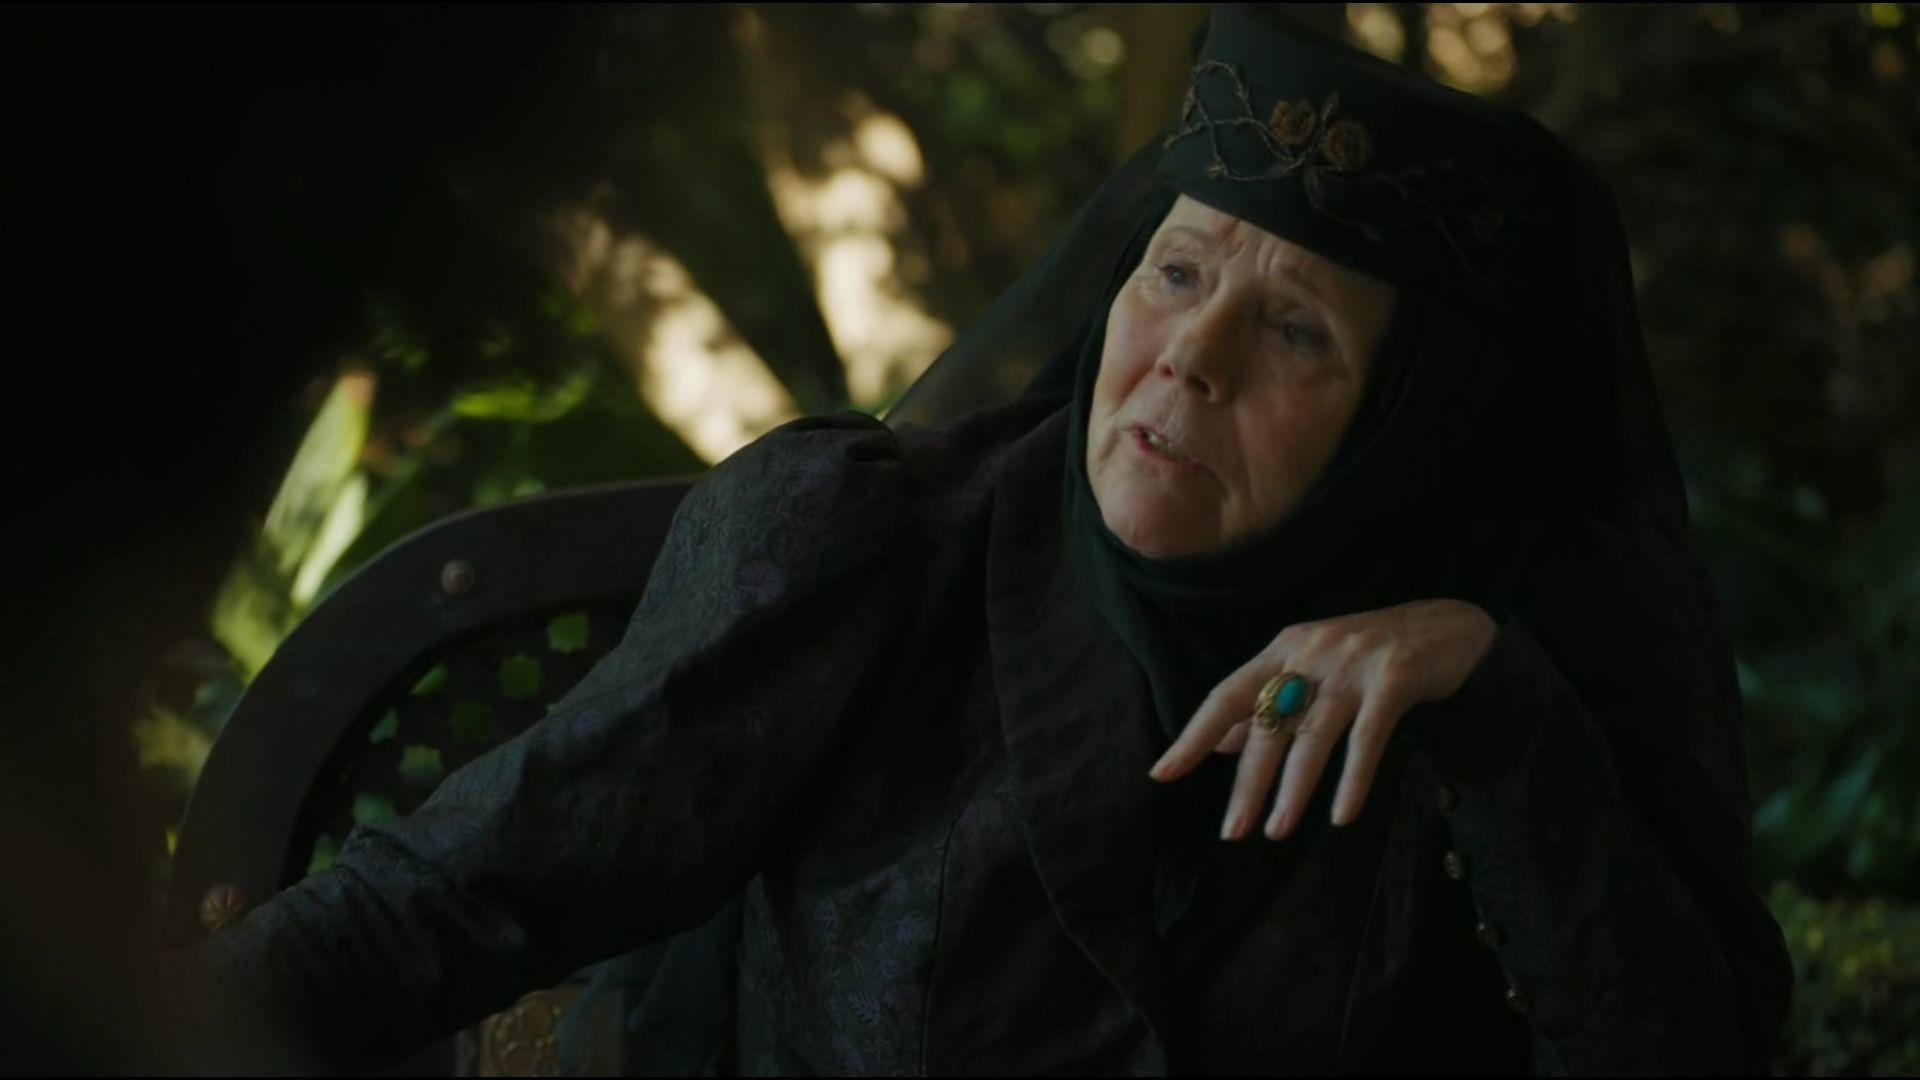 Actress Diana Rigg says Lady Olenna Tyrell is pretty evil